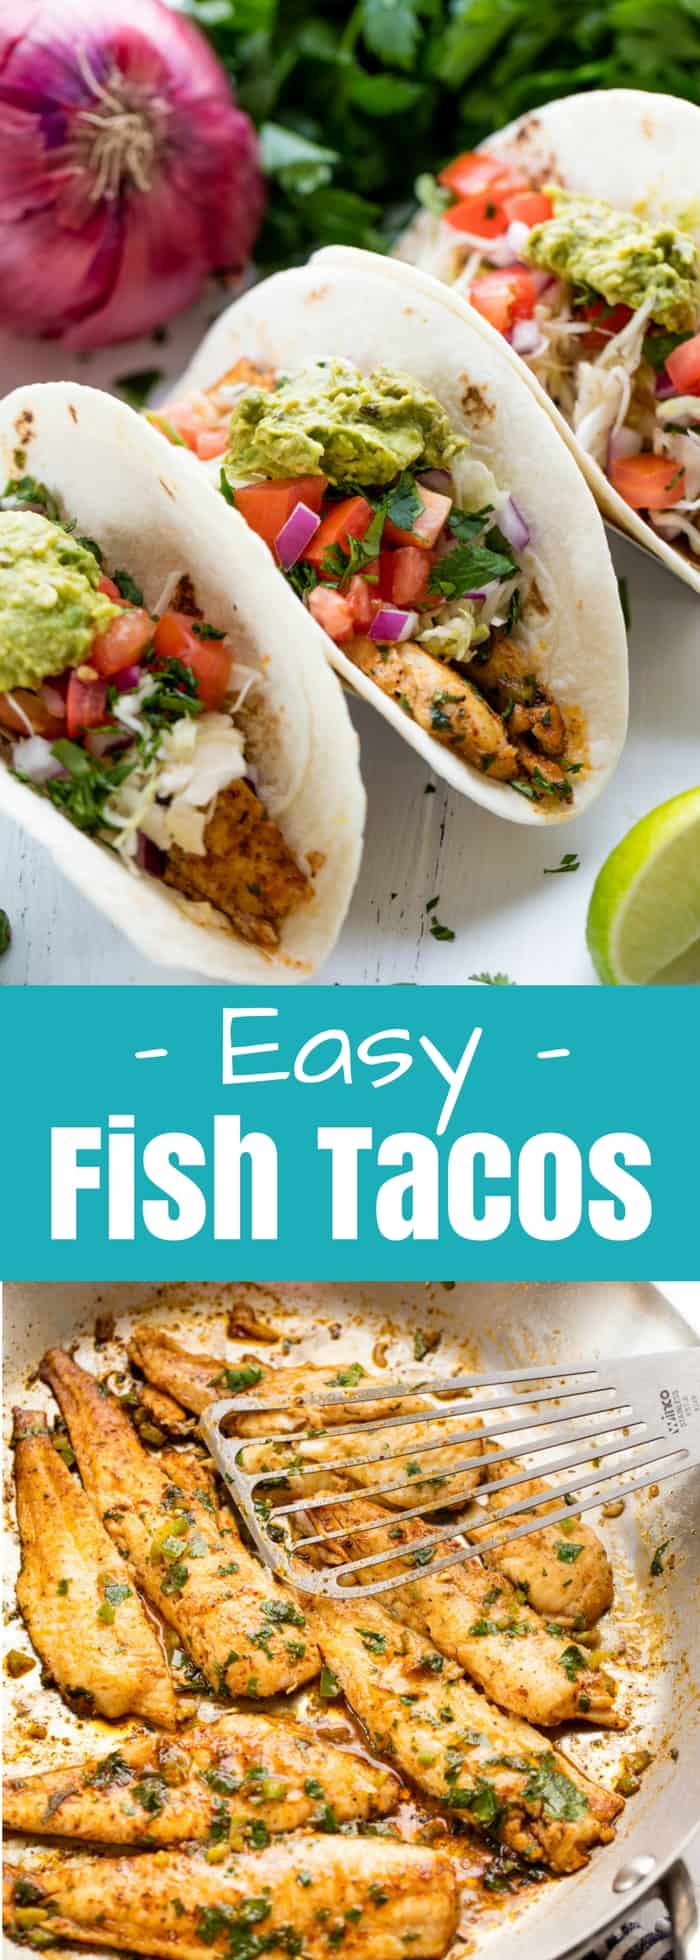  This Baja Fish Taco Recipe is super easy to make, healthy, and full of flavor. Your family will love this Mexican favorite!